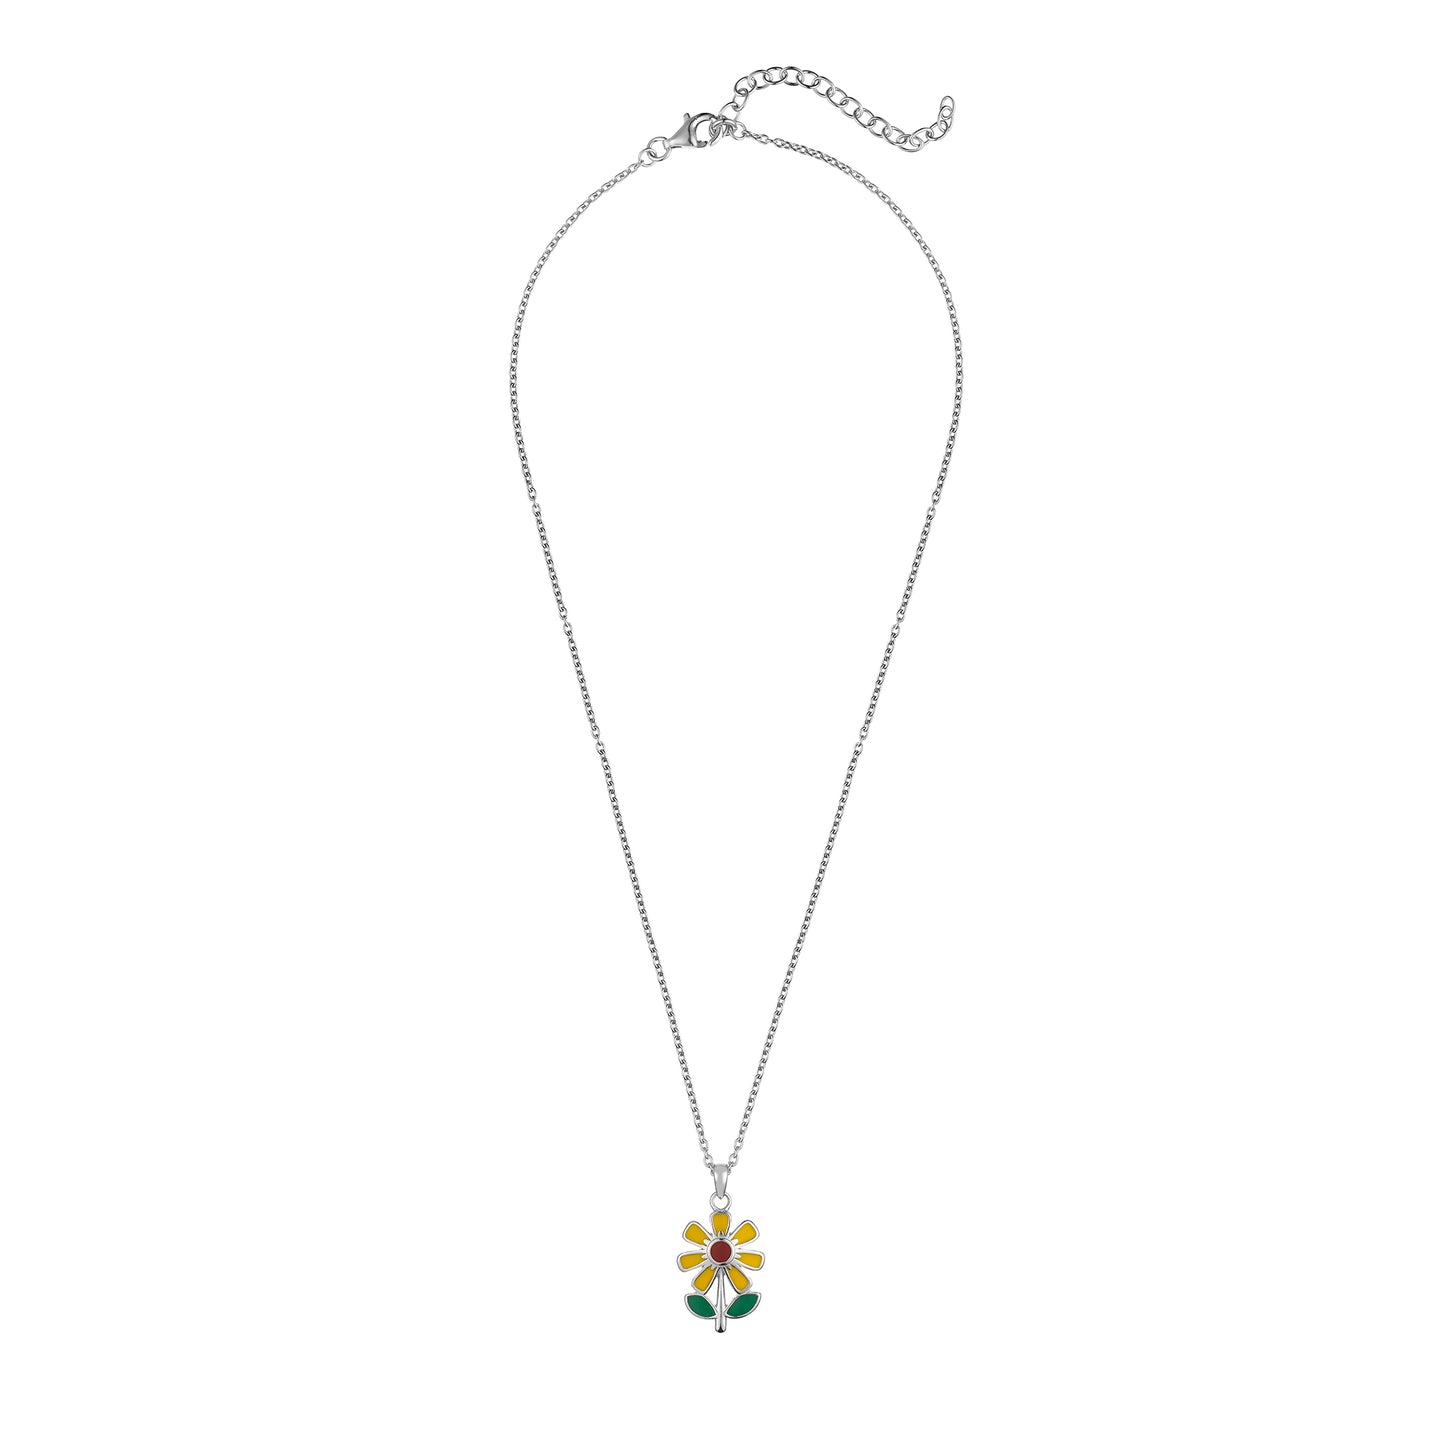 Children's Silver Sunflower with Yellow Enamel Pendant on an Extendable Chain Necklace